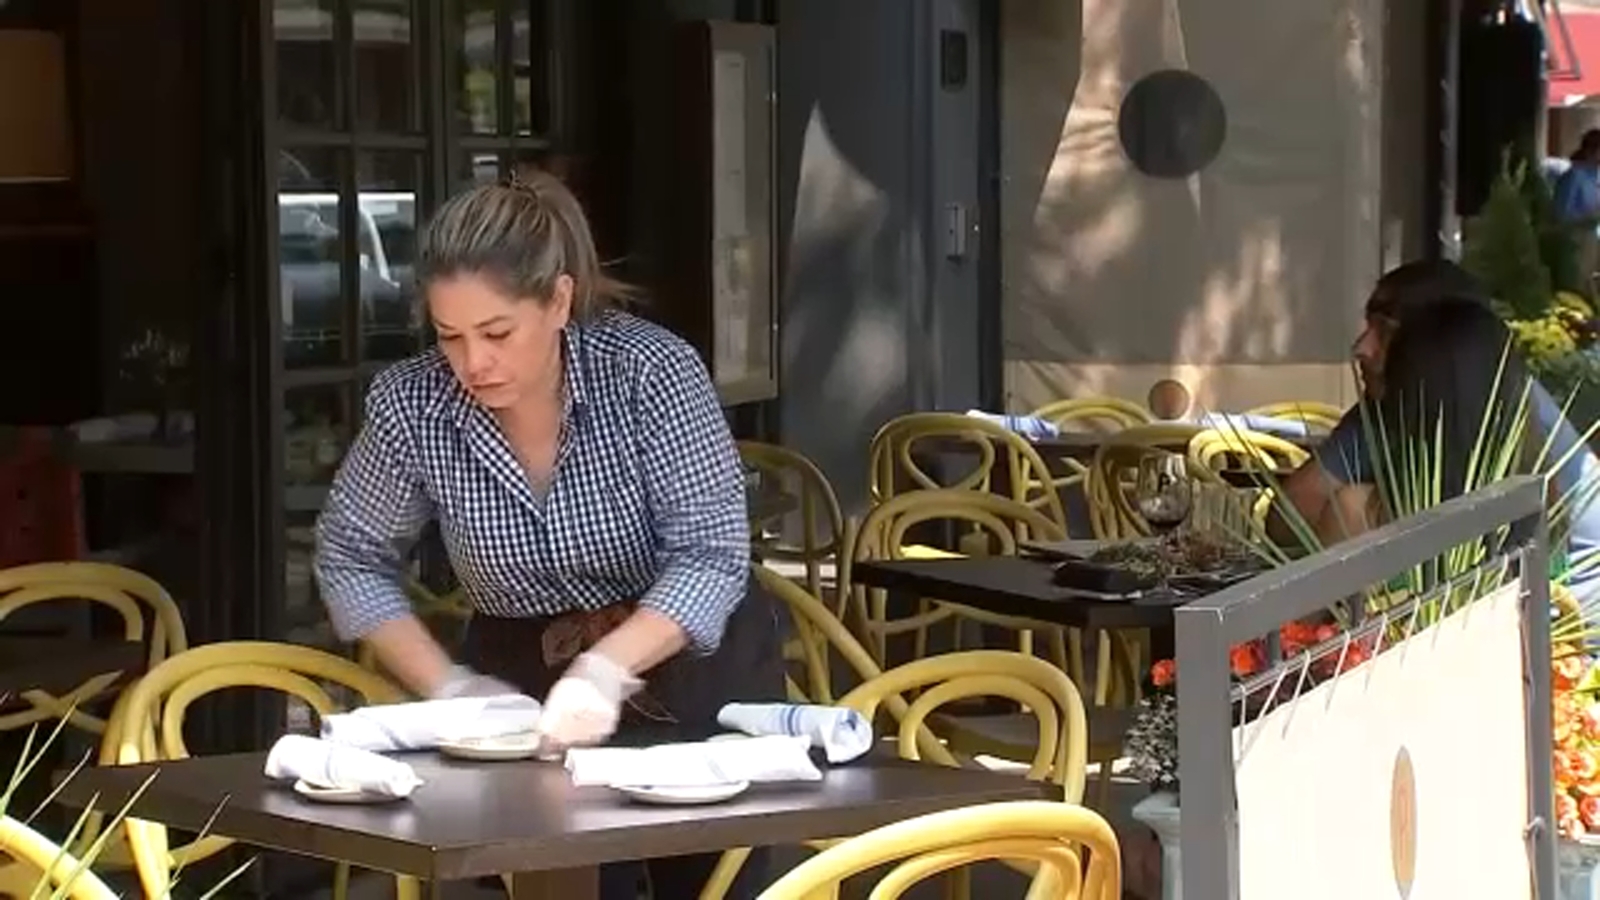 Americans are getting annoyed with tipping culture